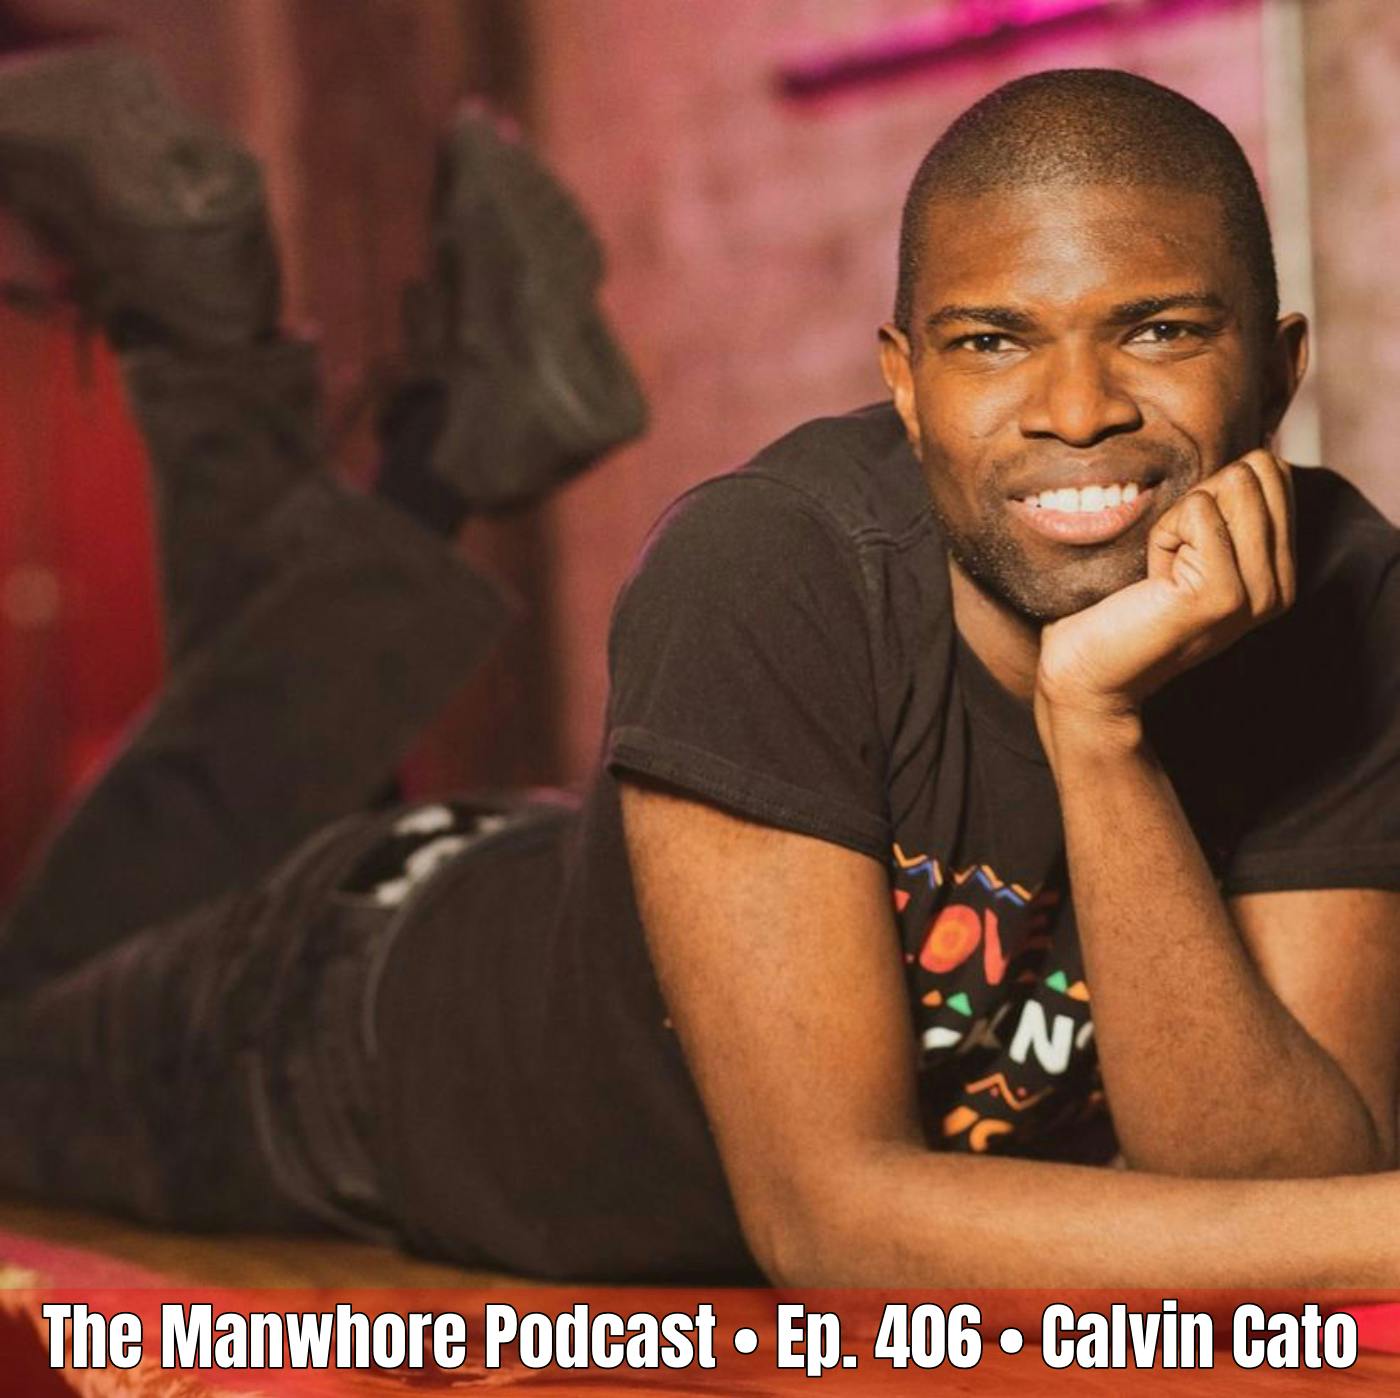 Ep. 406: Gay Bath Houses, Older Men, and Open Relationships with comedian Calvin Cato